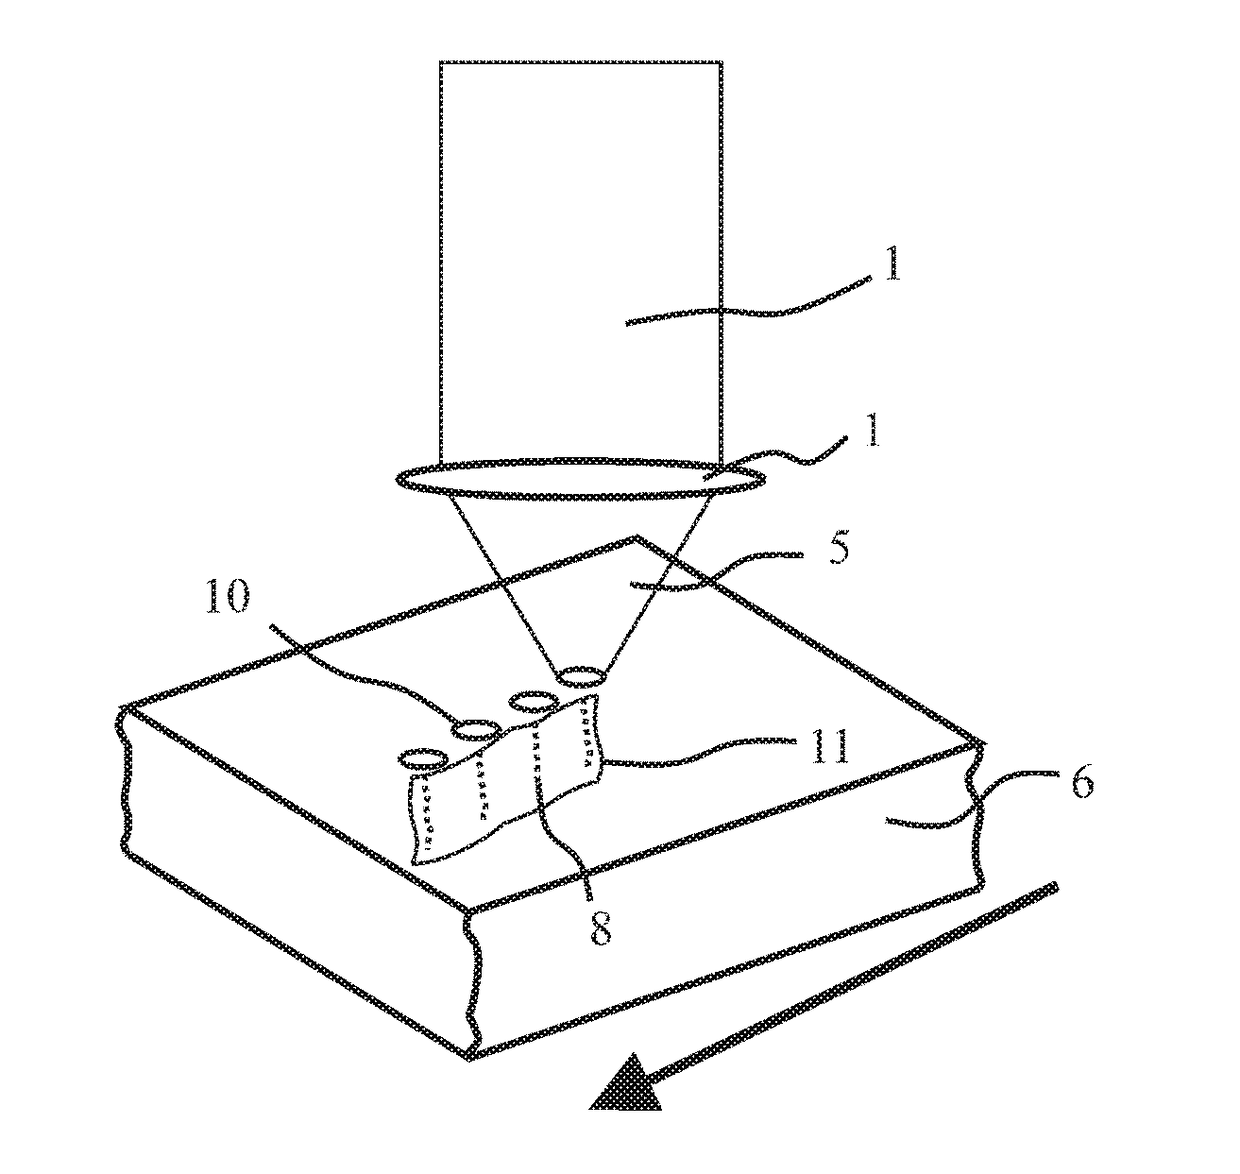 Method of laser processing for substrate cleaving or dicing through forming "spike-like" shaped damage structures